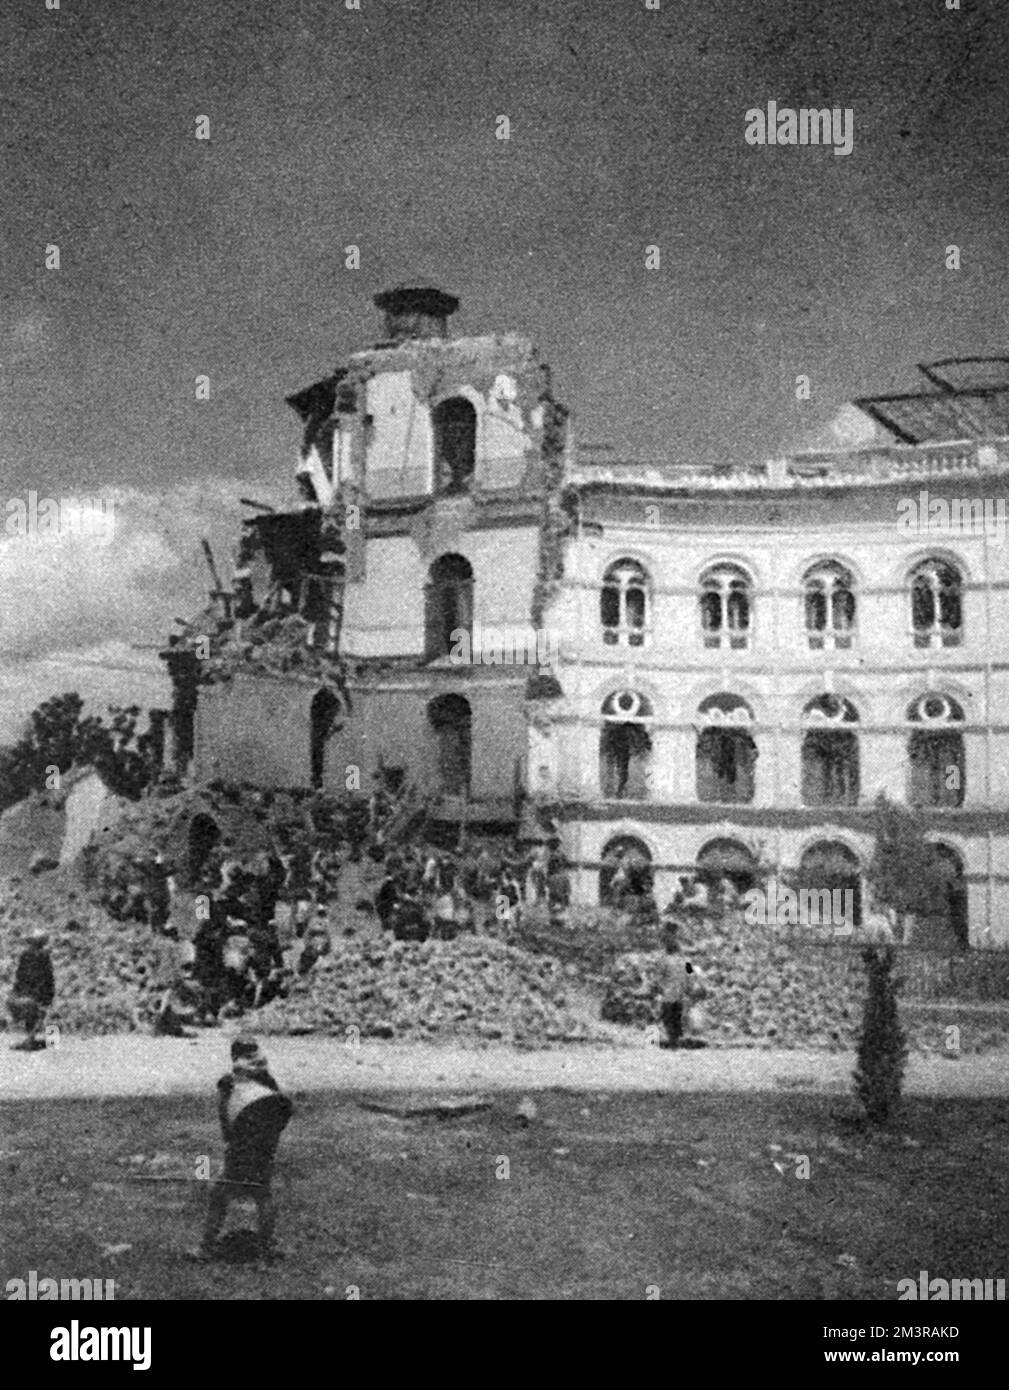 The ruins of the King's palace at Katmandu, Nepal's ancient capital: the part that collapsed in the earthquake, killing two daughters of his majesty the maharaja.       Date: January 1934 Stock Photo